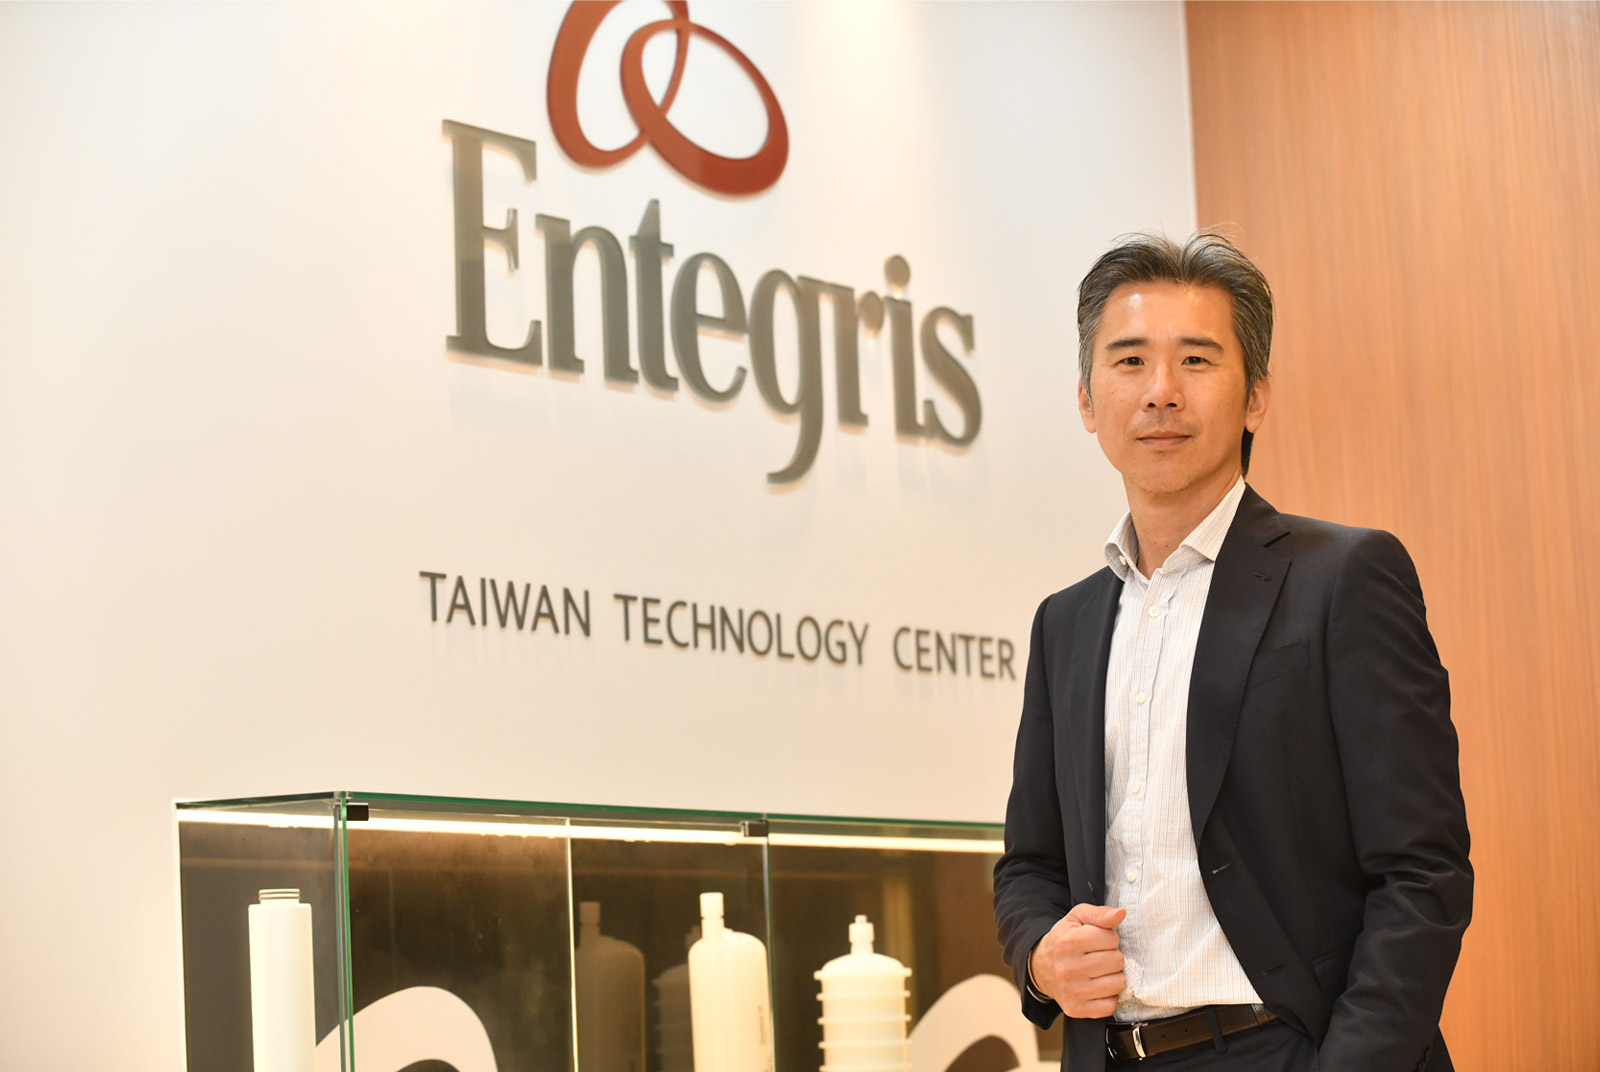 The rundown: Entegris doubles investment in new Kaohsiung plant